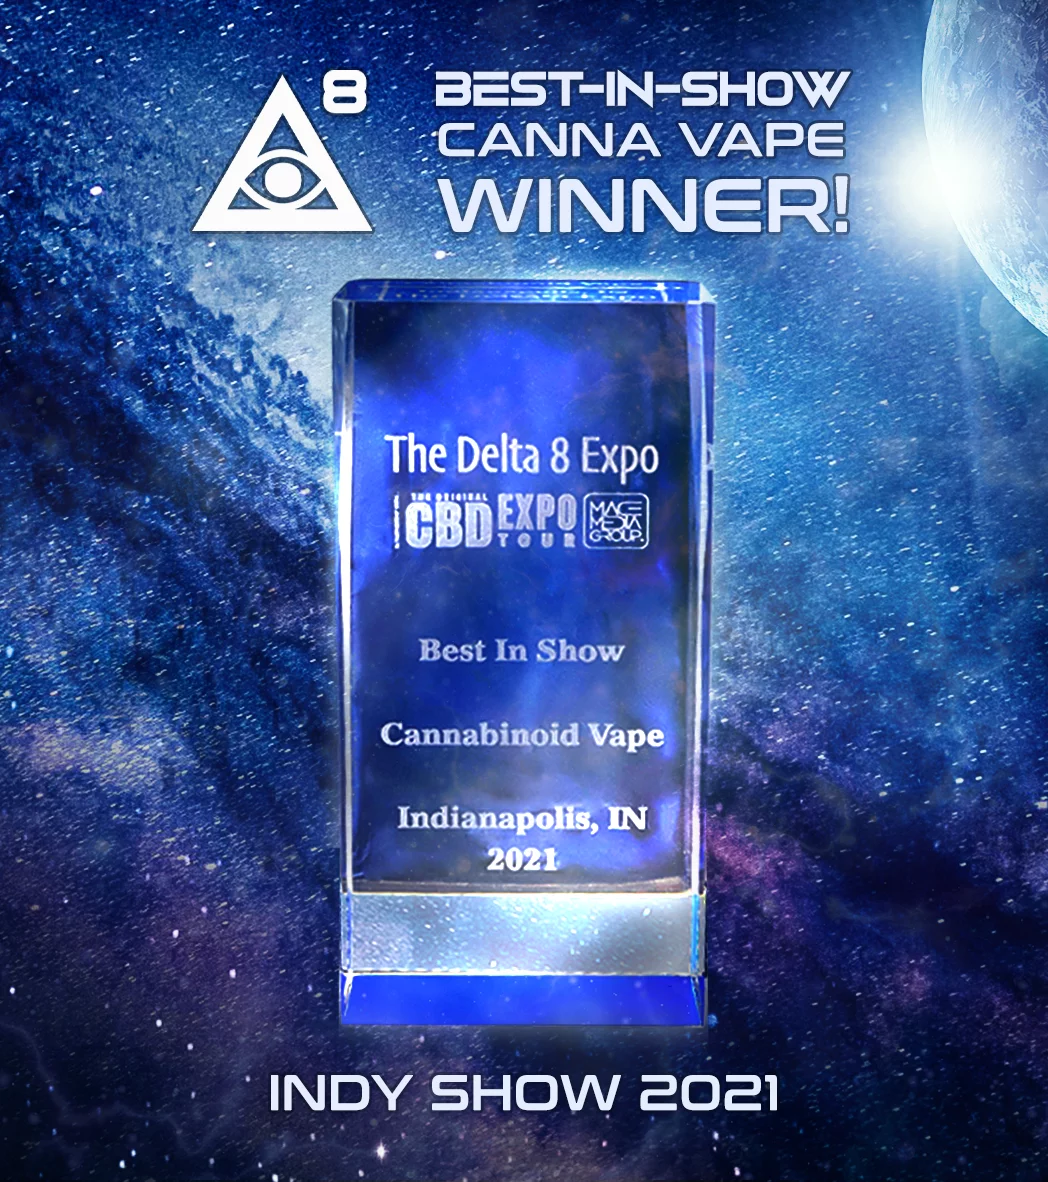 iDELTA8 The Delta 8 Expo CBD Expo Tour Best In Show Cannabinoid Vape Indianapolis INDY SHOW 2021